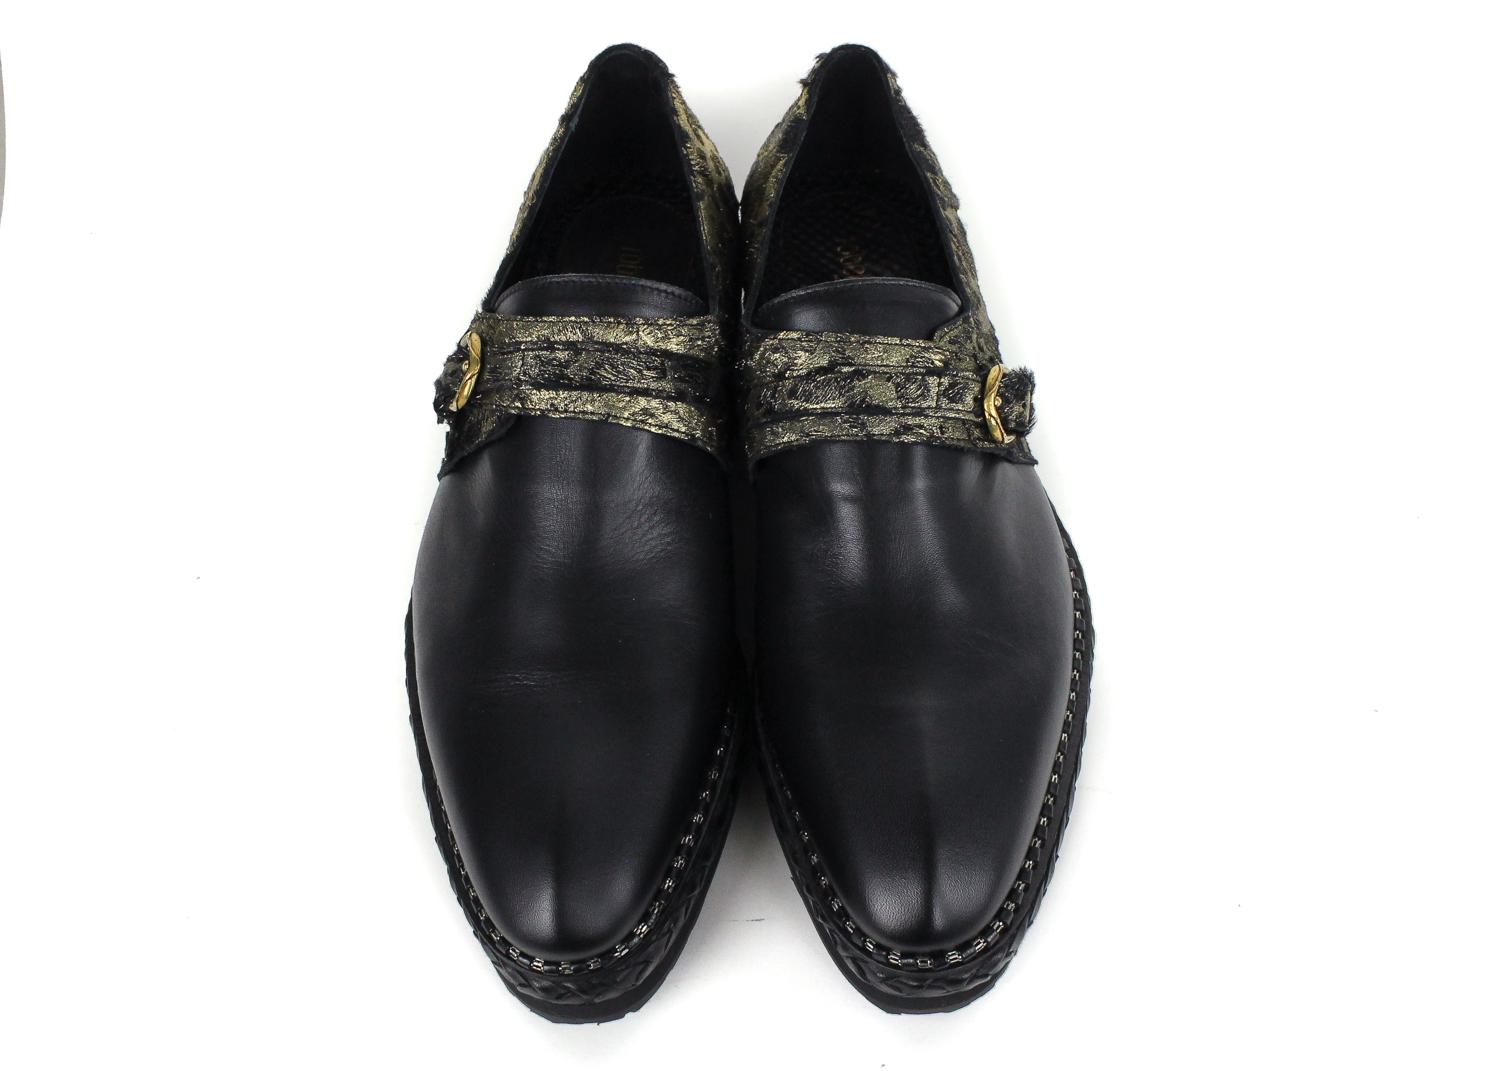 Roberto Cavalli Mens Black Leather and Gold Metallic Loafers. These loafers feature a gold metallic detailing and a buckle fastening for easy access. Pair these loafers with black slacks and a polo shirt for a chic every day look.

Leather 
Gold